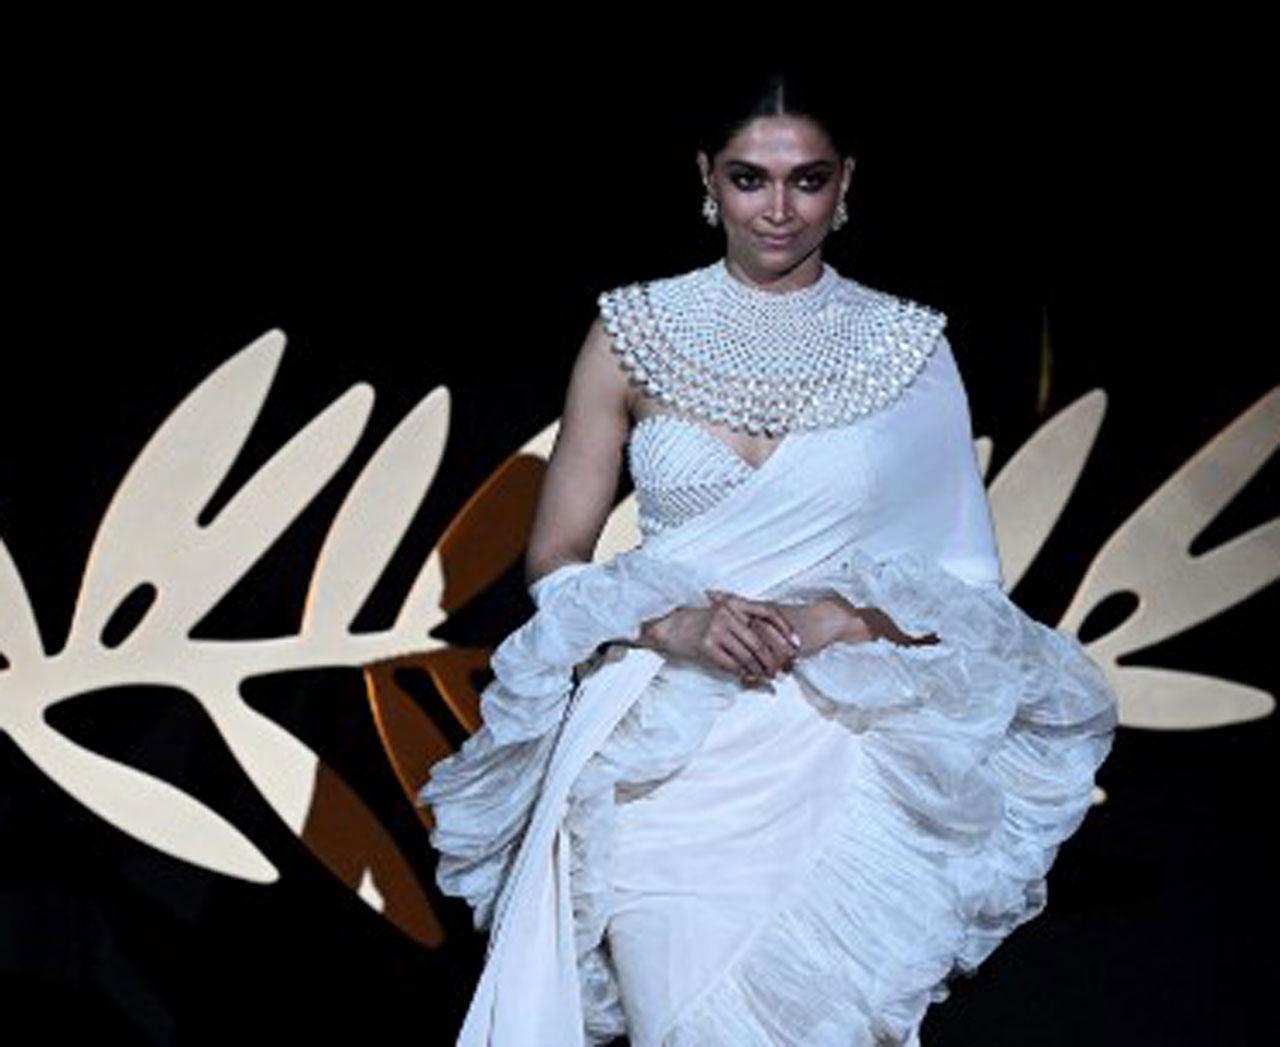 Earlier, during the inauguration of the India pavilion at Cannes 2022 on Wednesday, the actress spoke about how Indian cinema has come a long way. “I feel we have a long way to go as a country. I feel really proud to be here as an Indian and to be representing the country.”